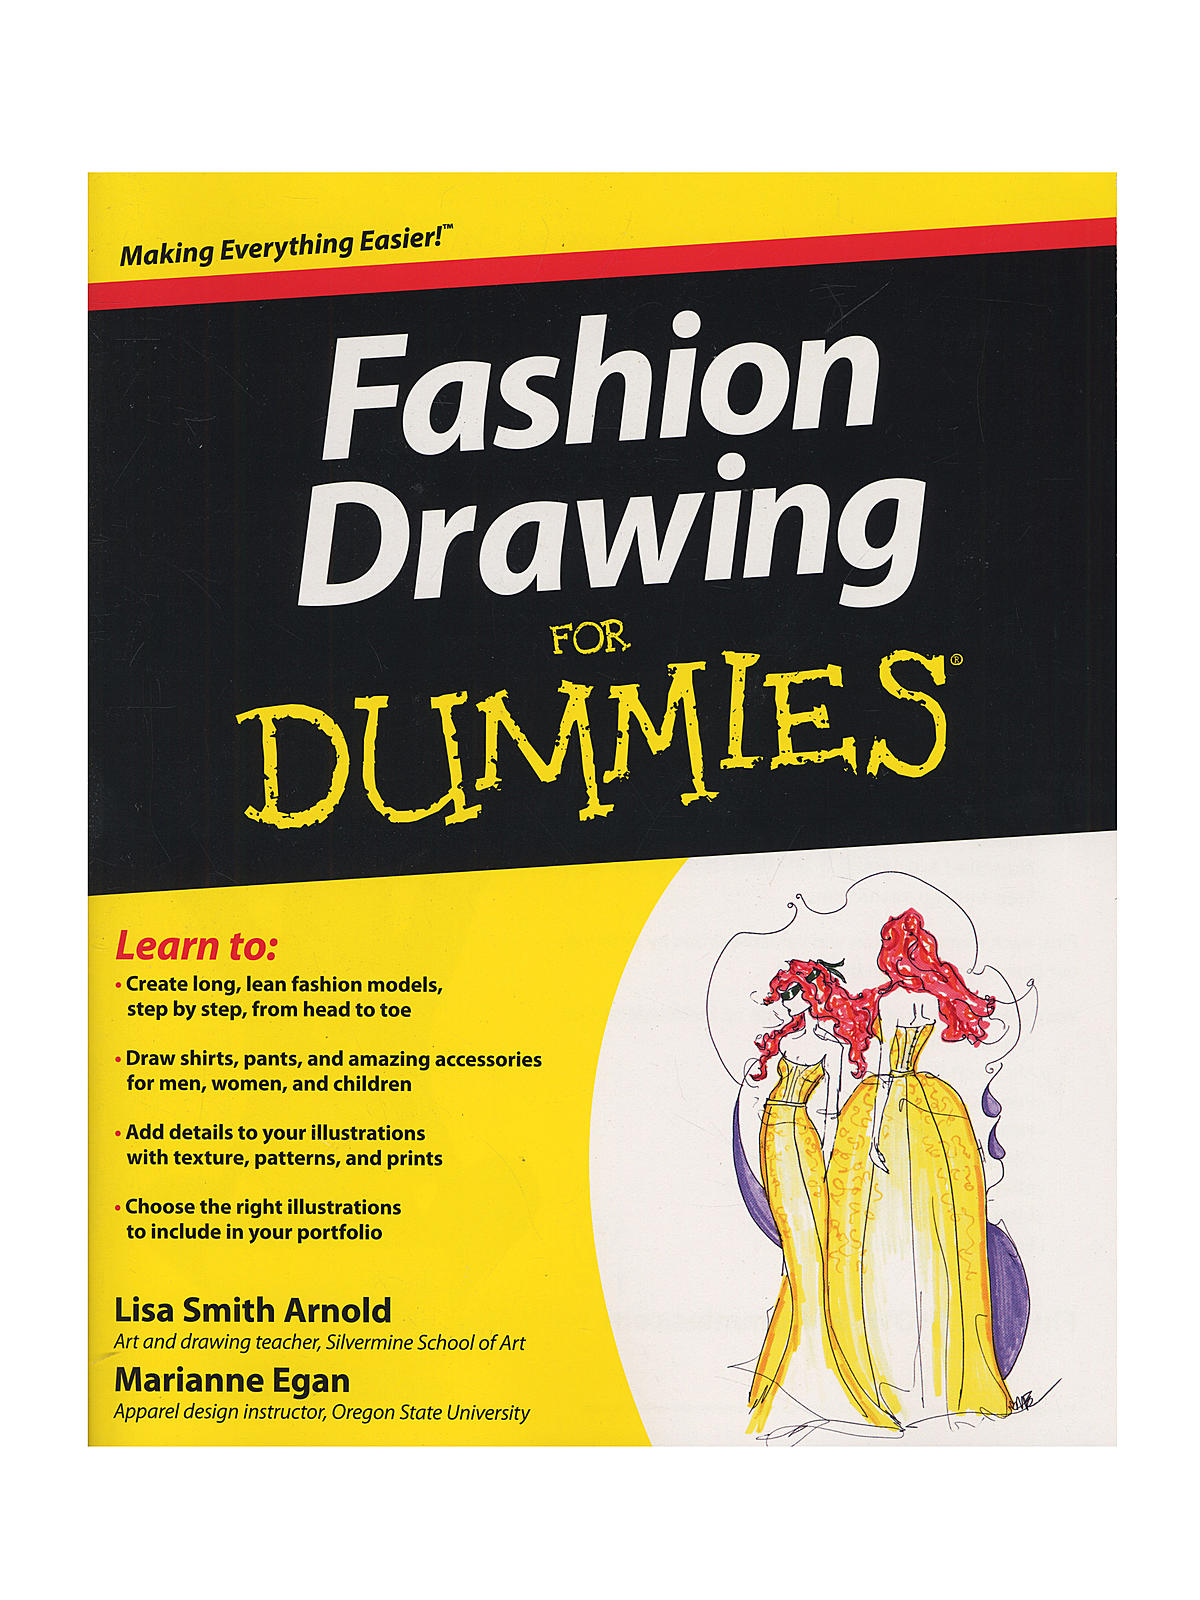 For Dummies Series Fashion Drawing For Dummies